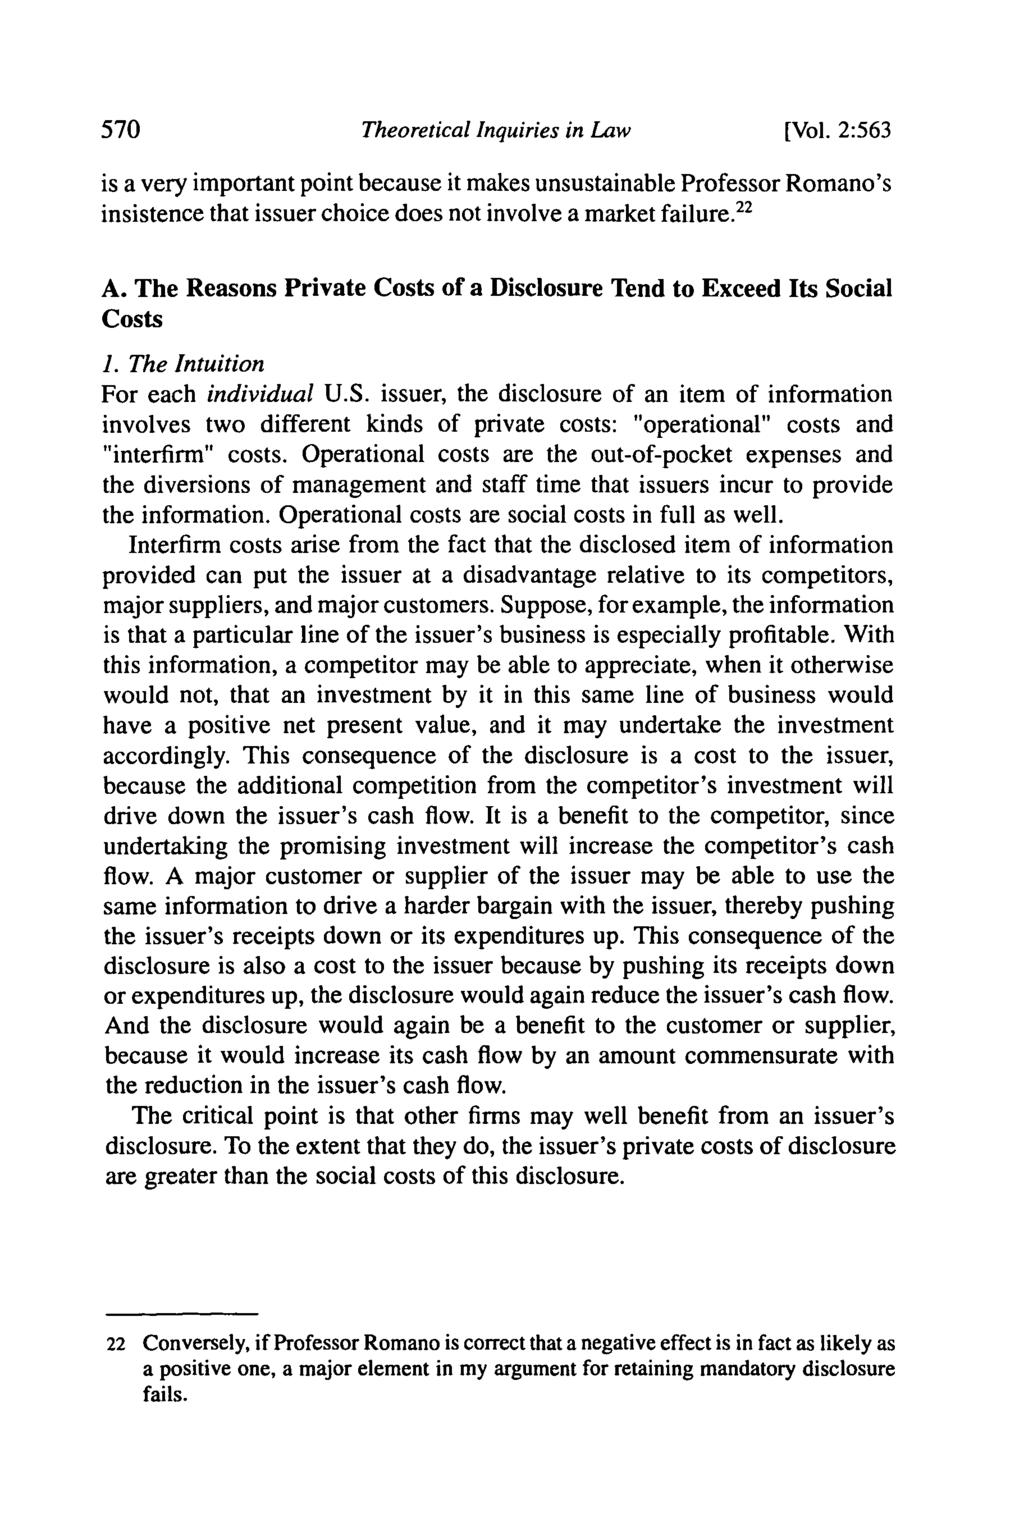 570 Theoretical Inquiries in Law [Vol. 2:563 is a very important point because it makes unsustainable Professor Romano's insistence that issuer choice does not involve a market failure. 22 A.